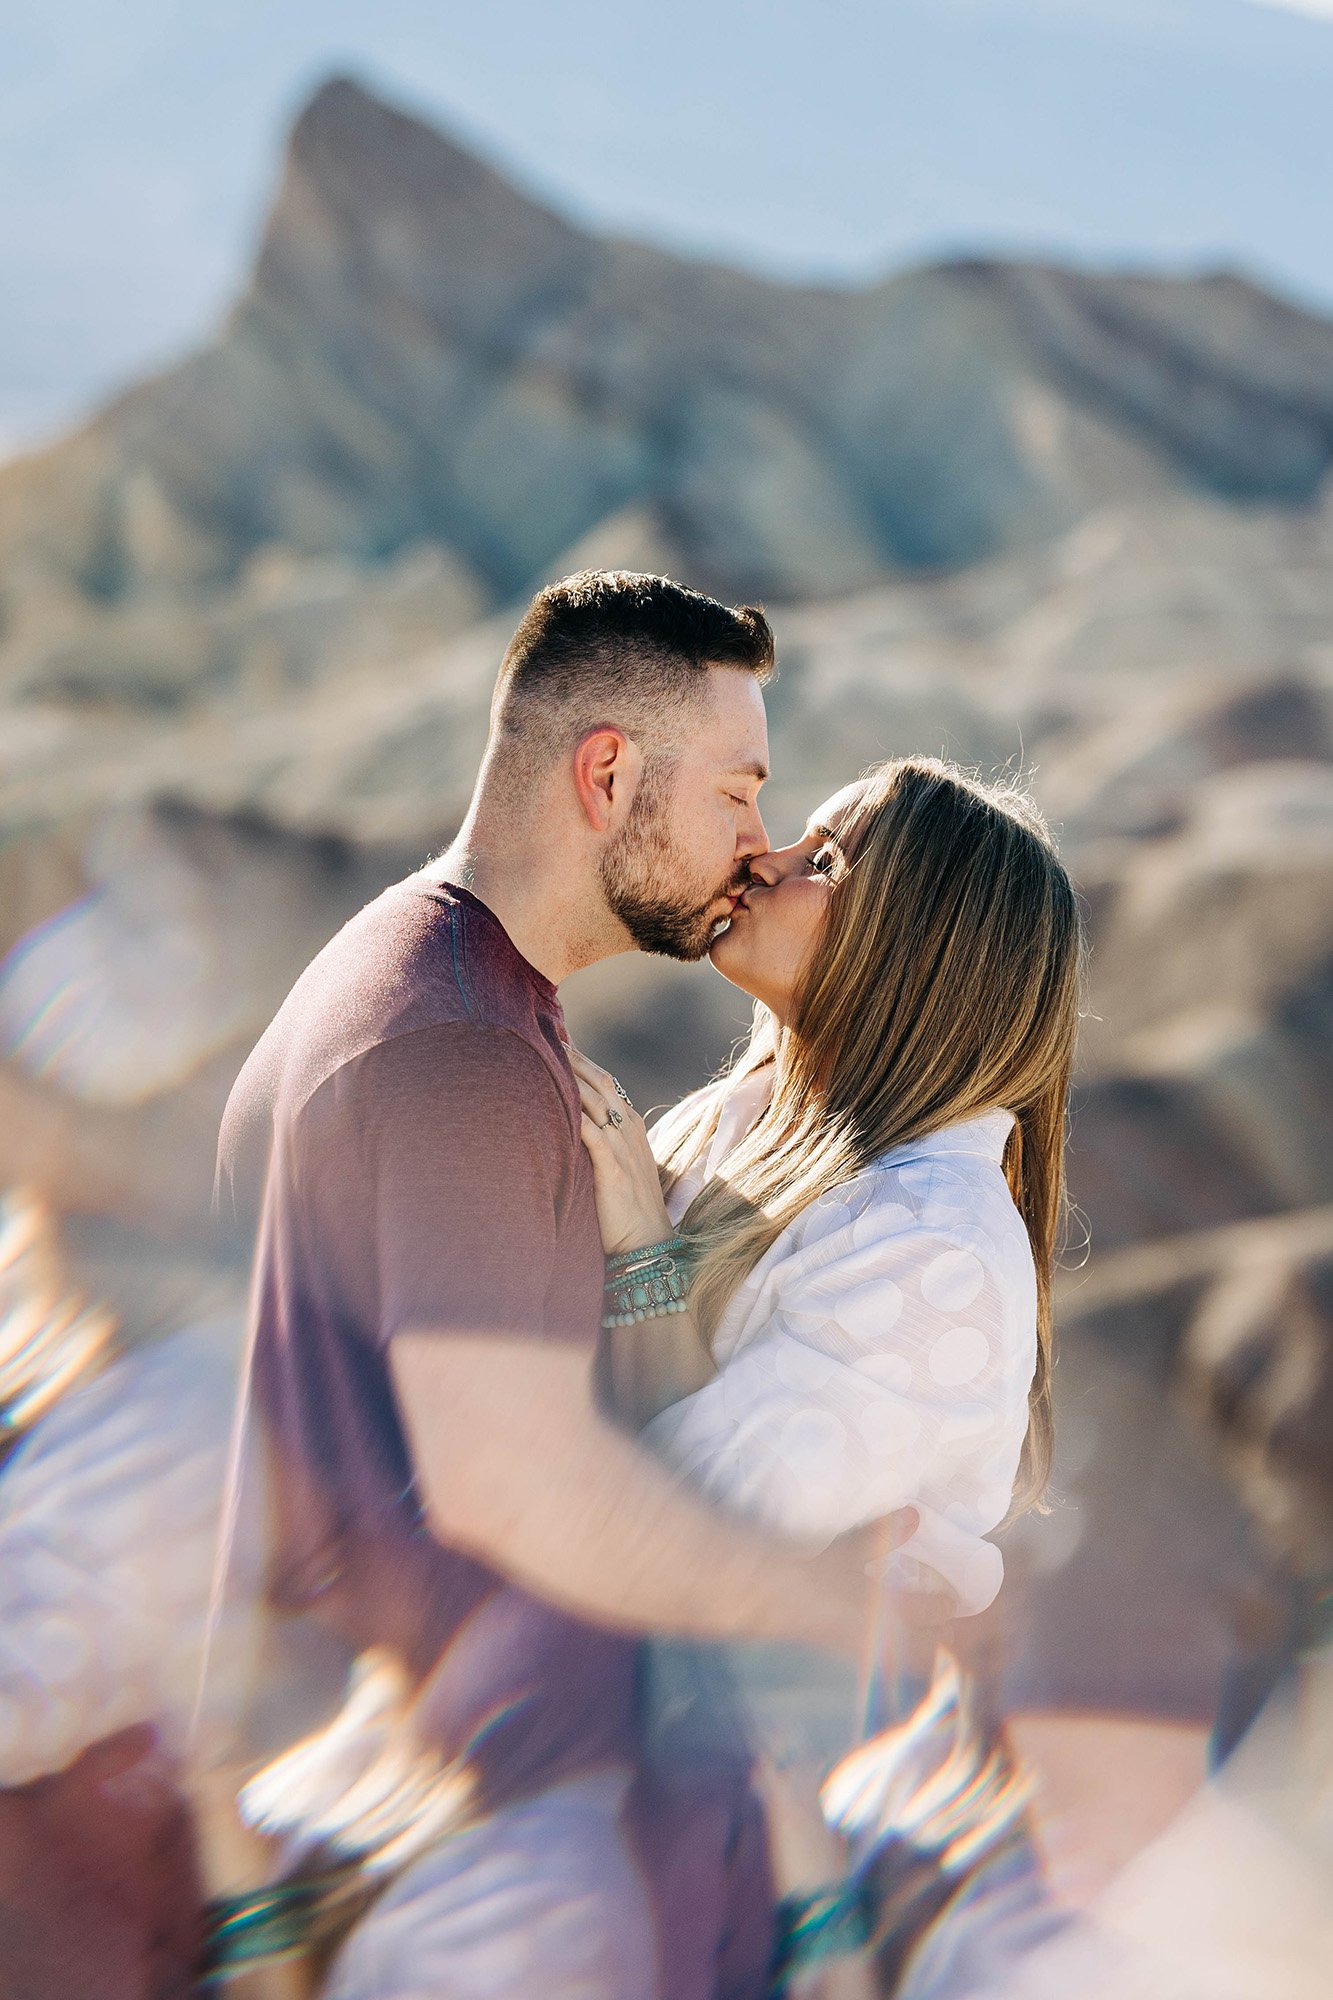 Aly and Alex kiss in Death Valley National Park.